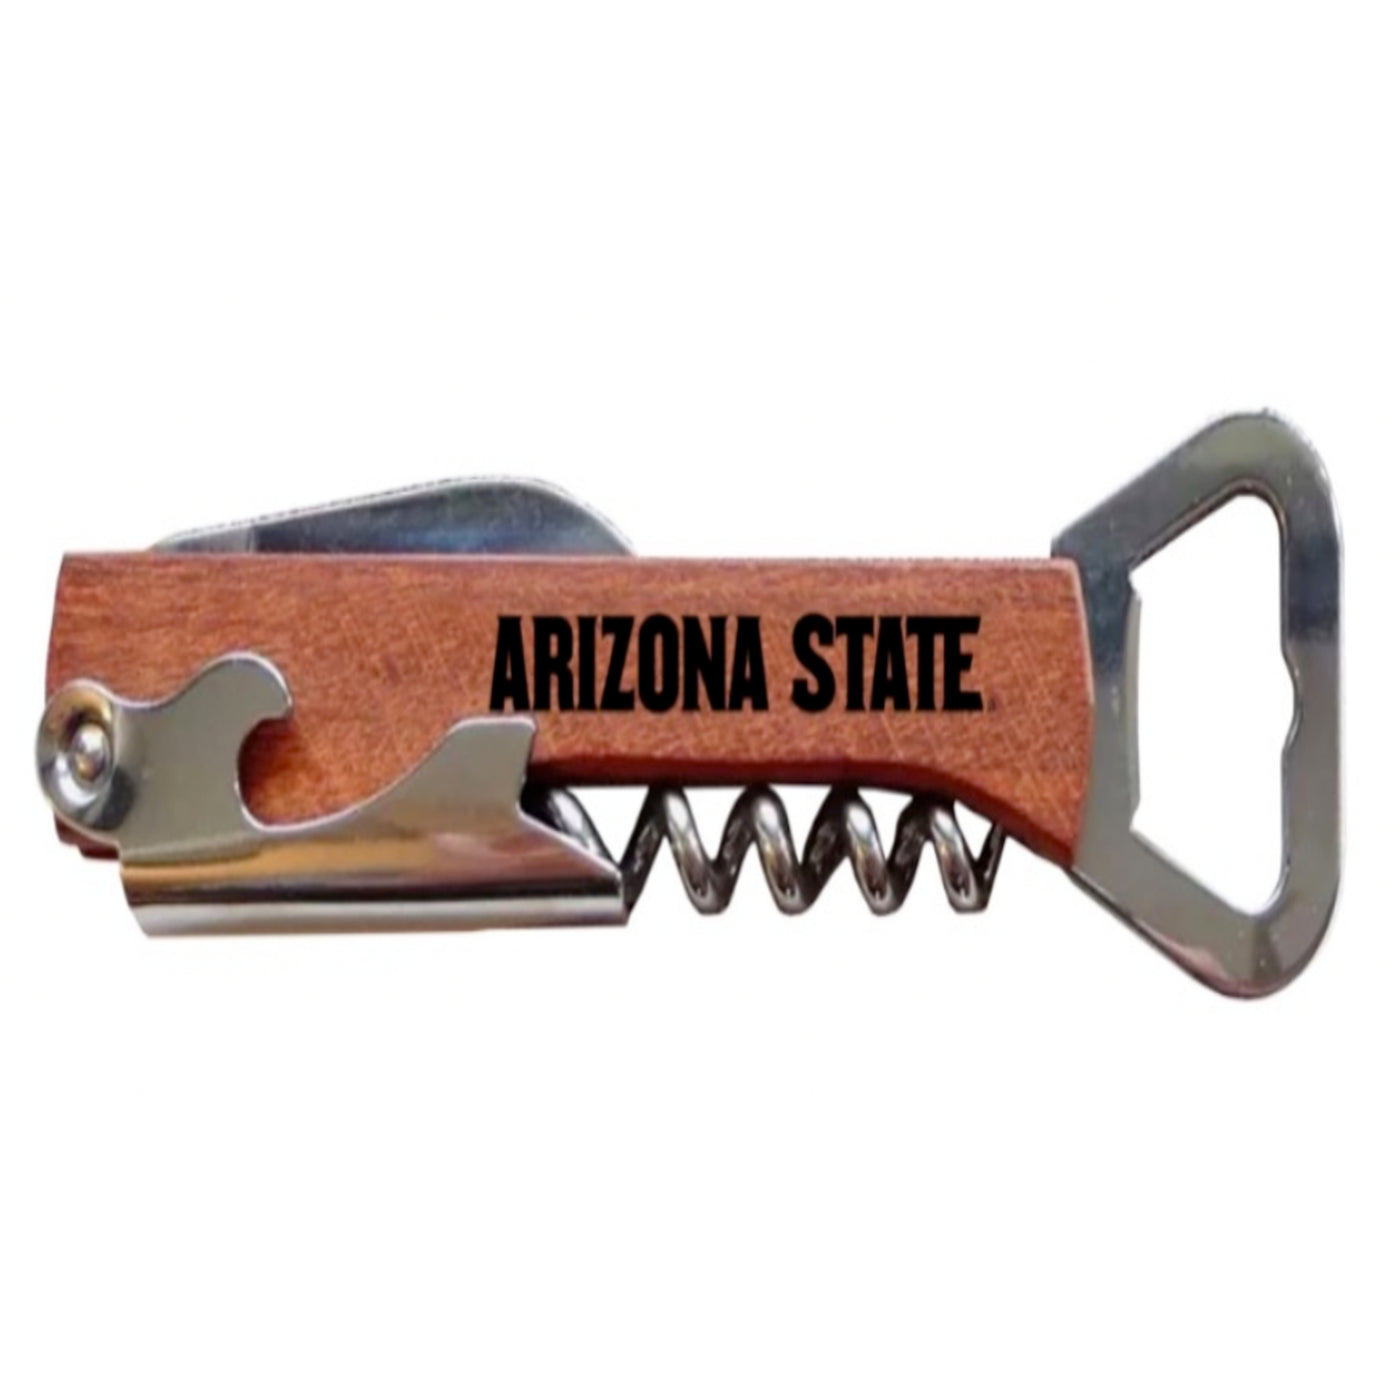 ASu wood wine/bottle openers with 'Arizona State' lettering carved into the wood